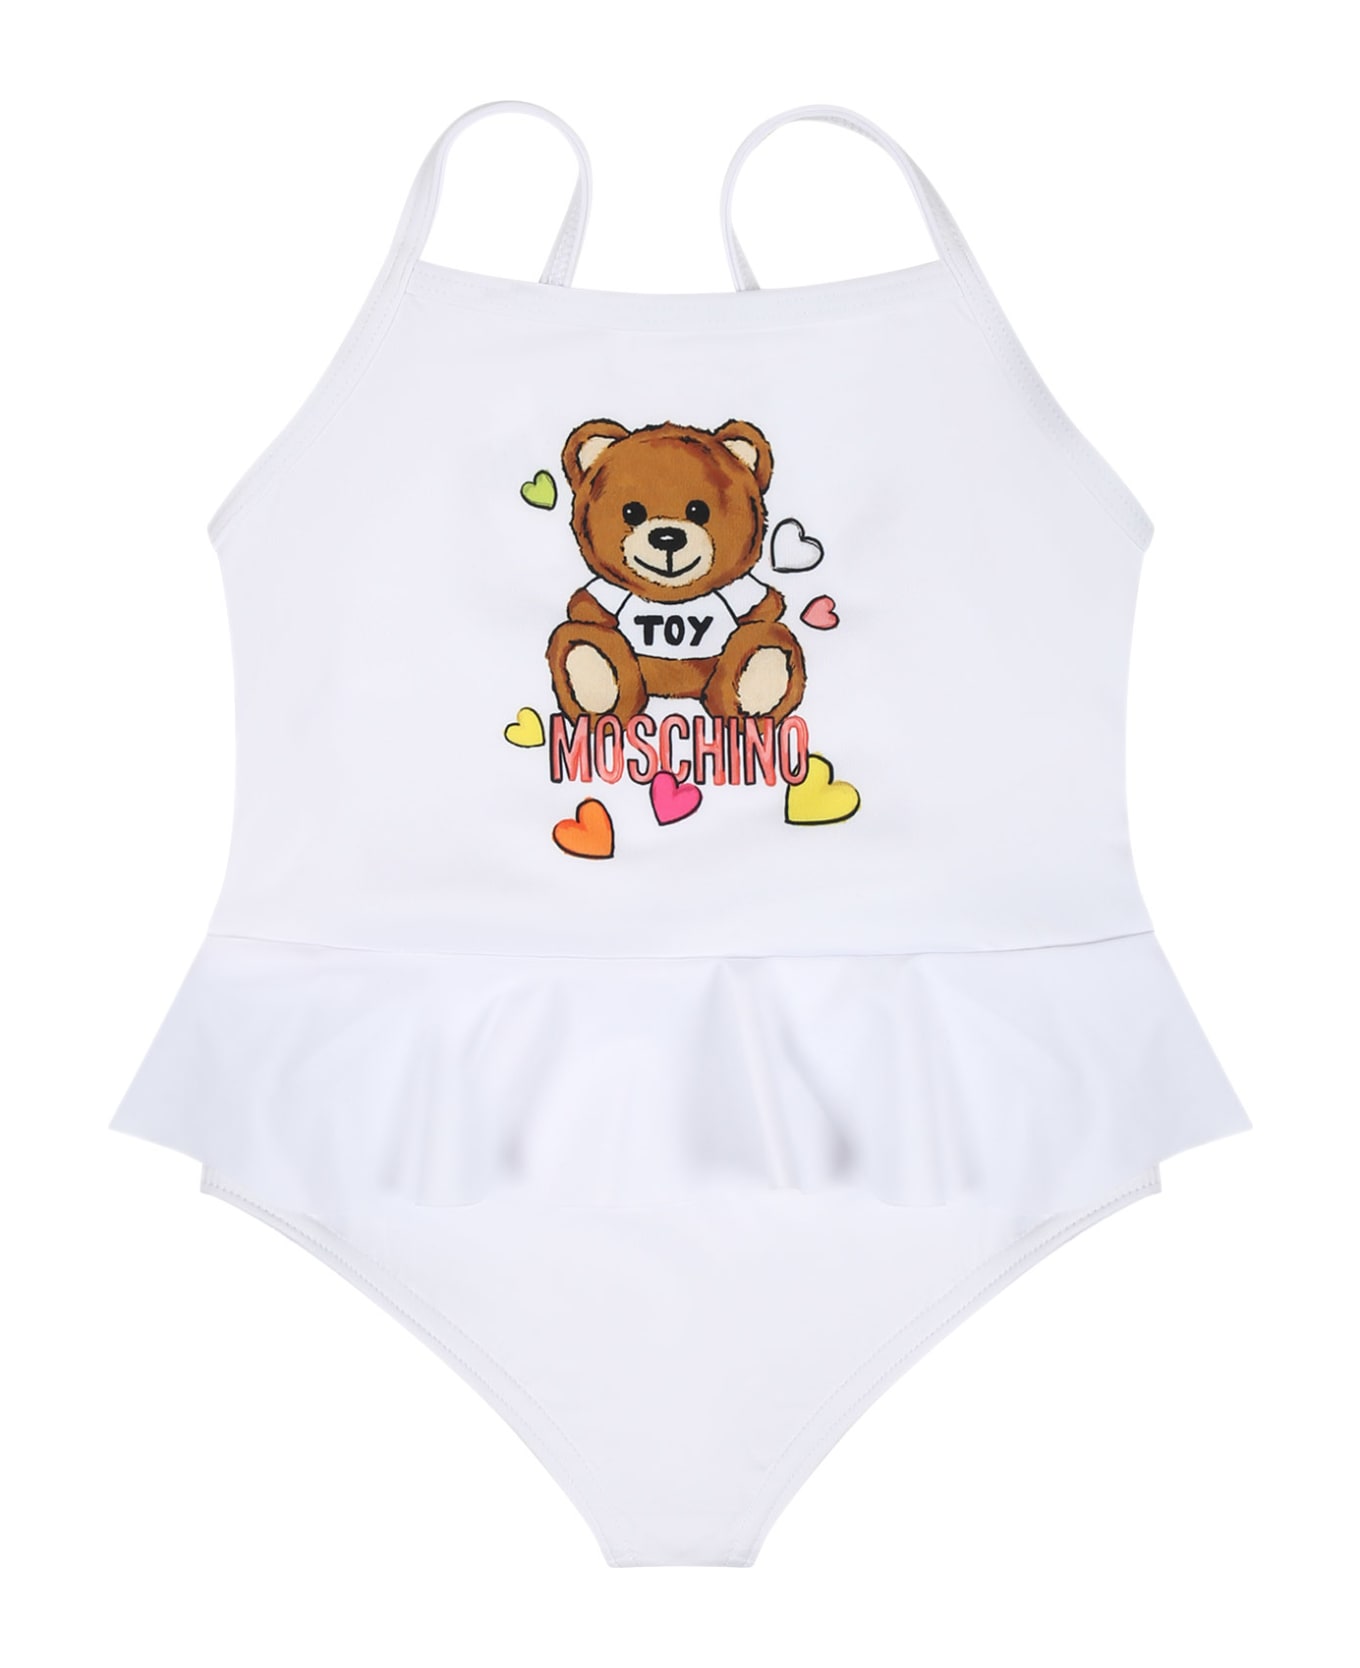 Moschino White Swimsuit For Baby Girl With Teddy Bear And Logo - White 水着